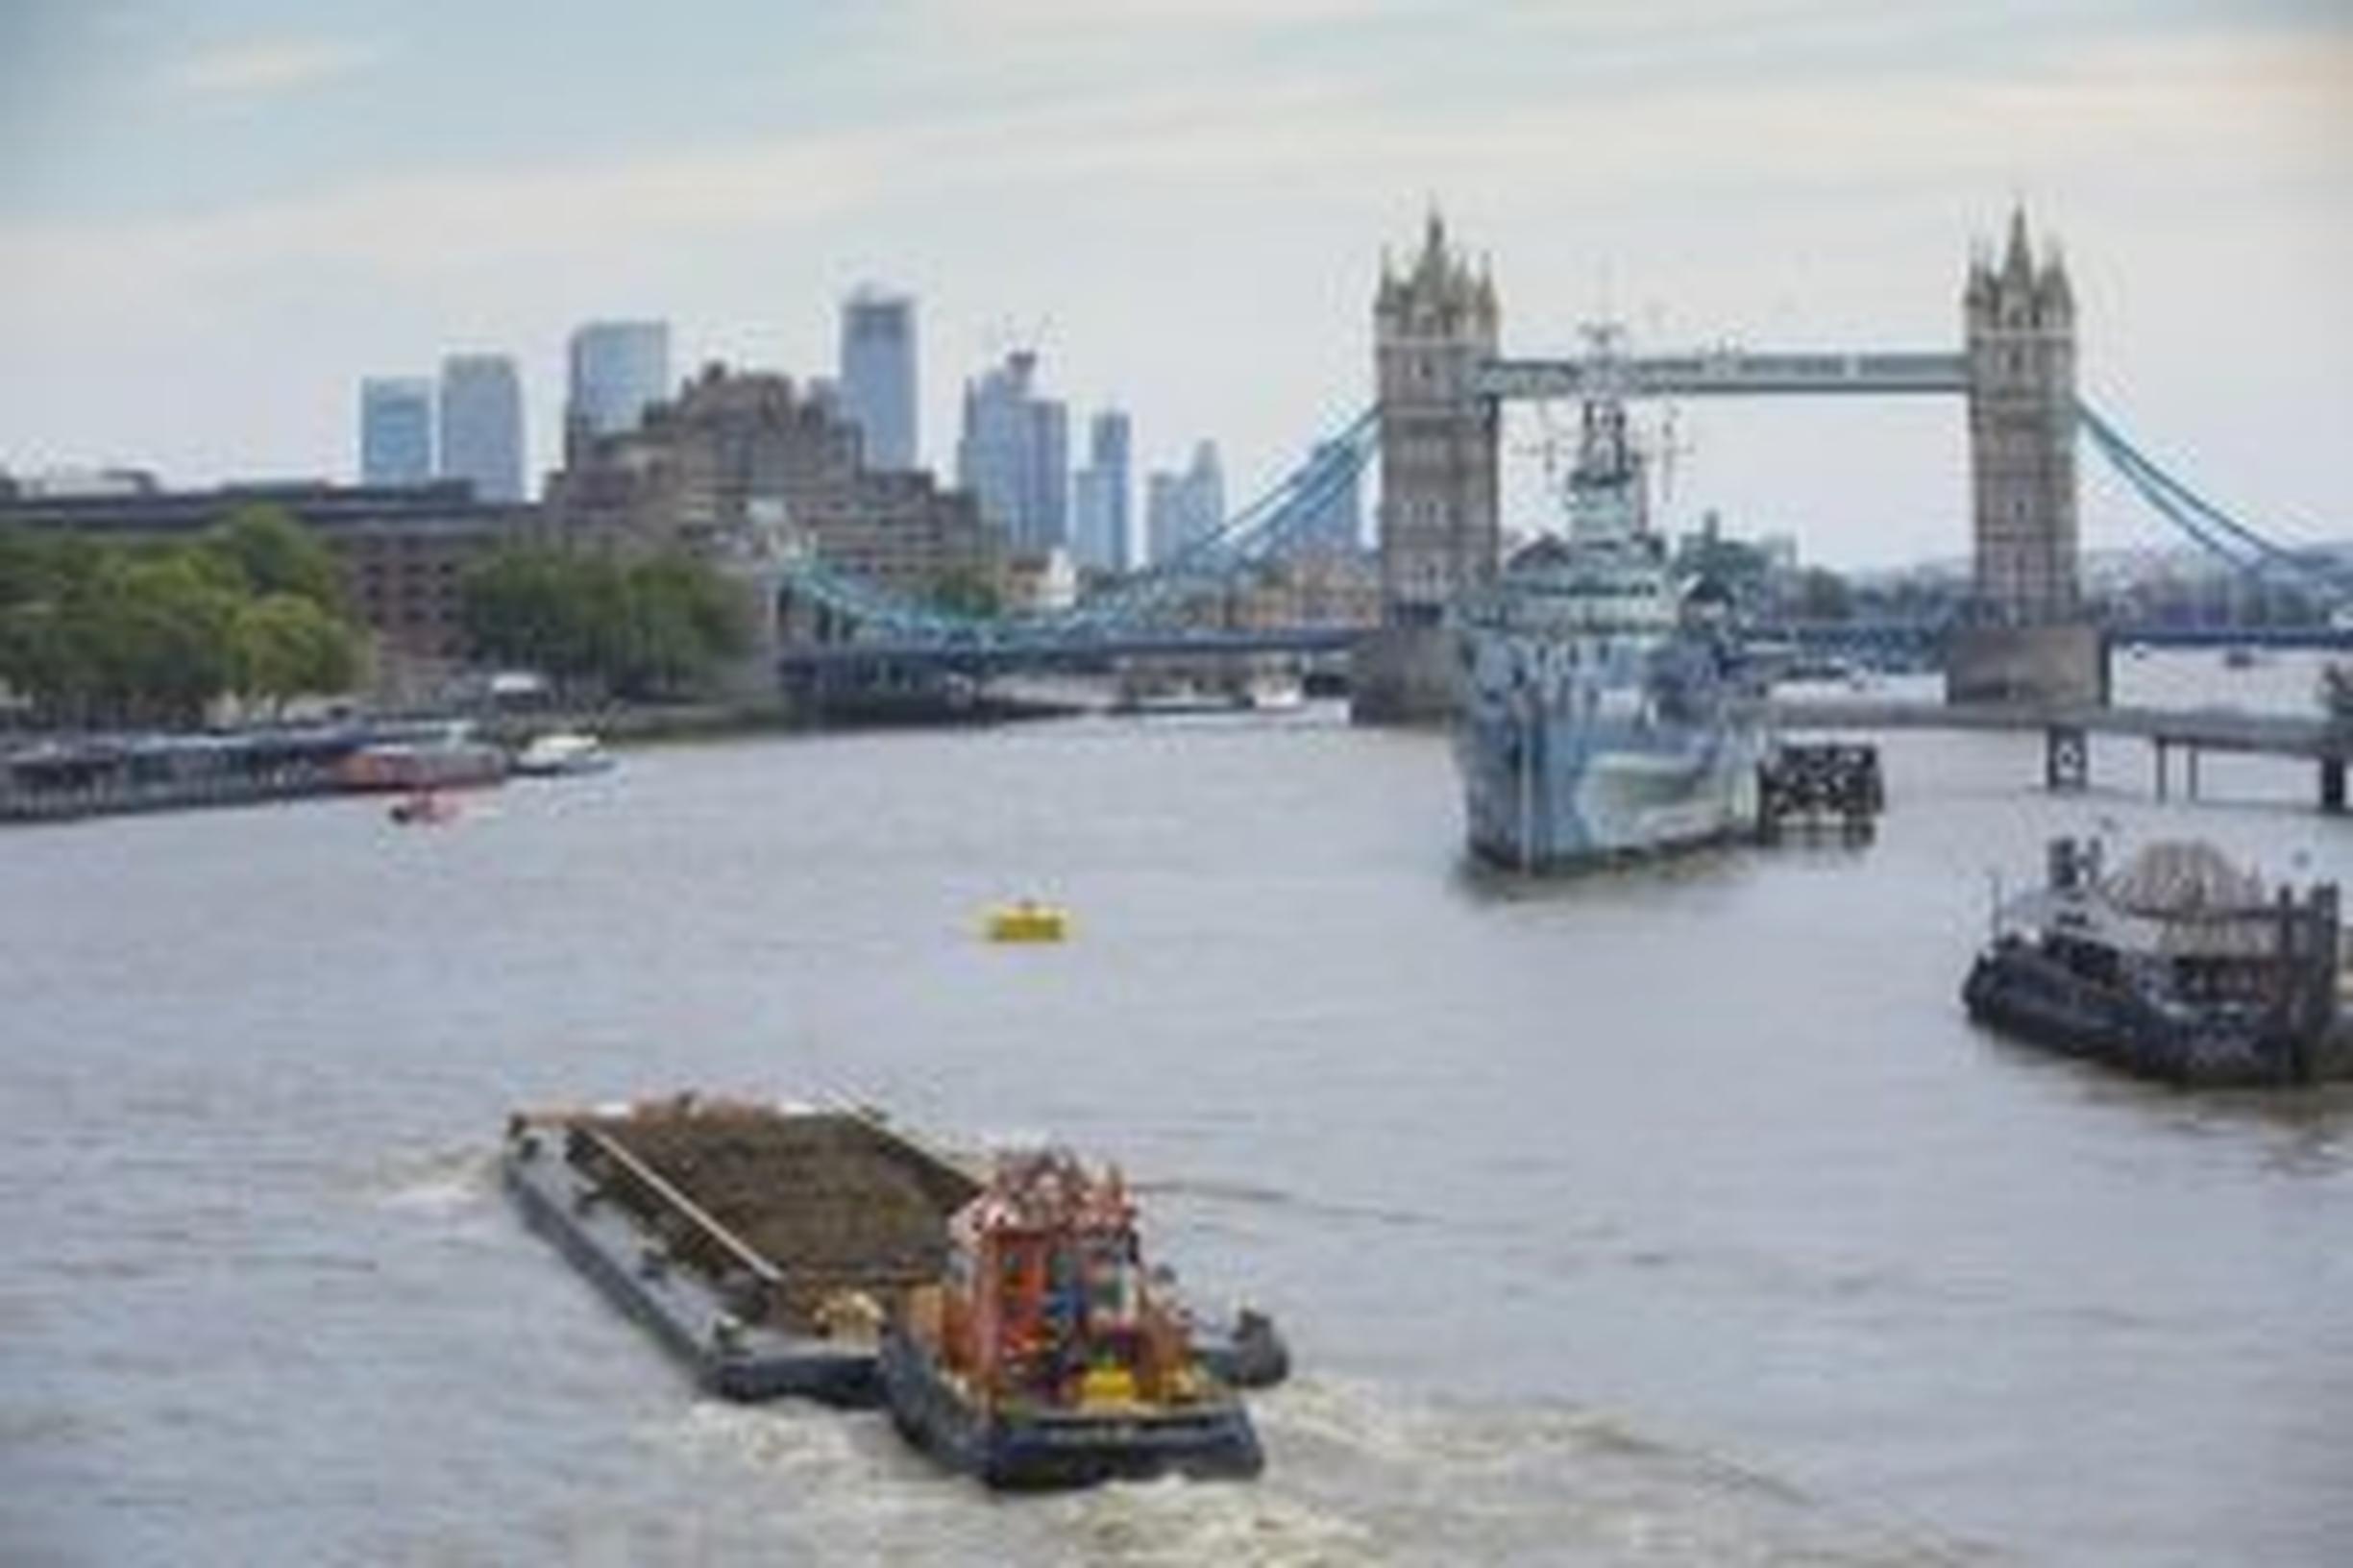 Tideway is building a 25km Super Sewer under the Thames